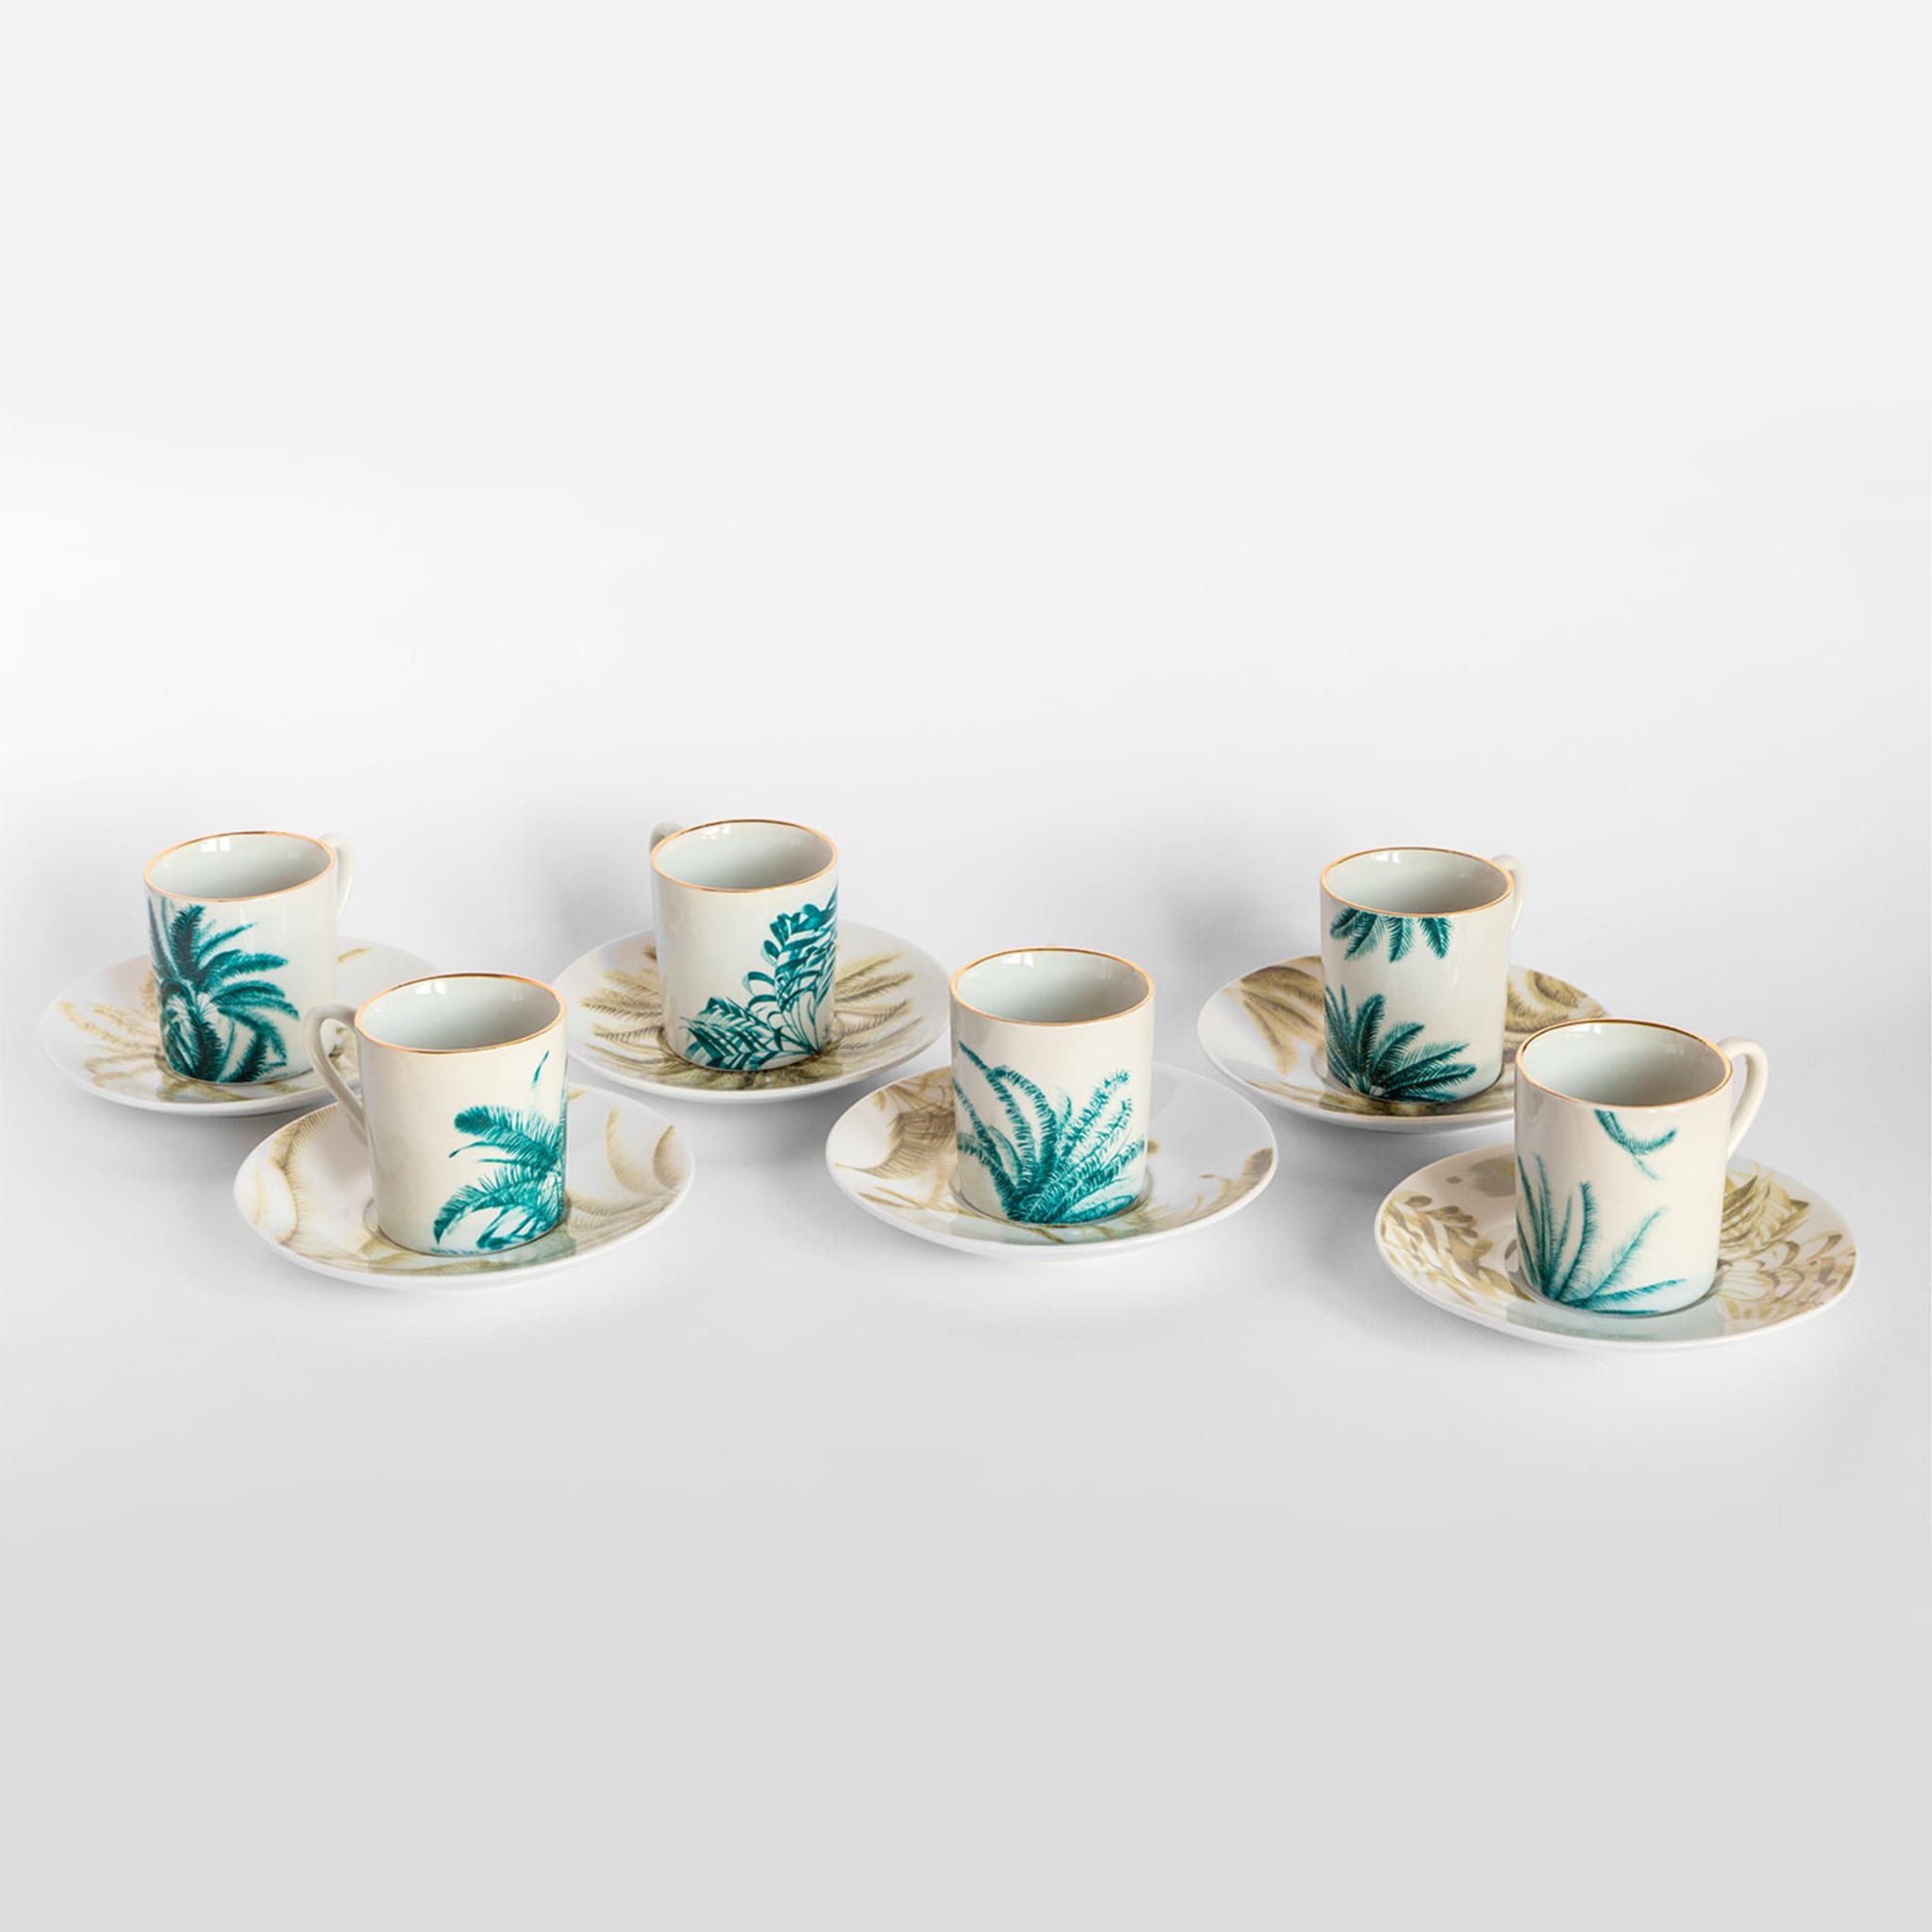 Las Palmas Set Of 6 Porcelain Espresso Cups With Blue And Yellow Palms - Alternative view 1